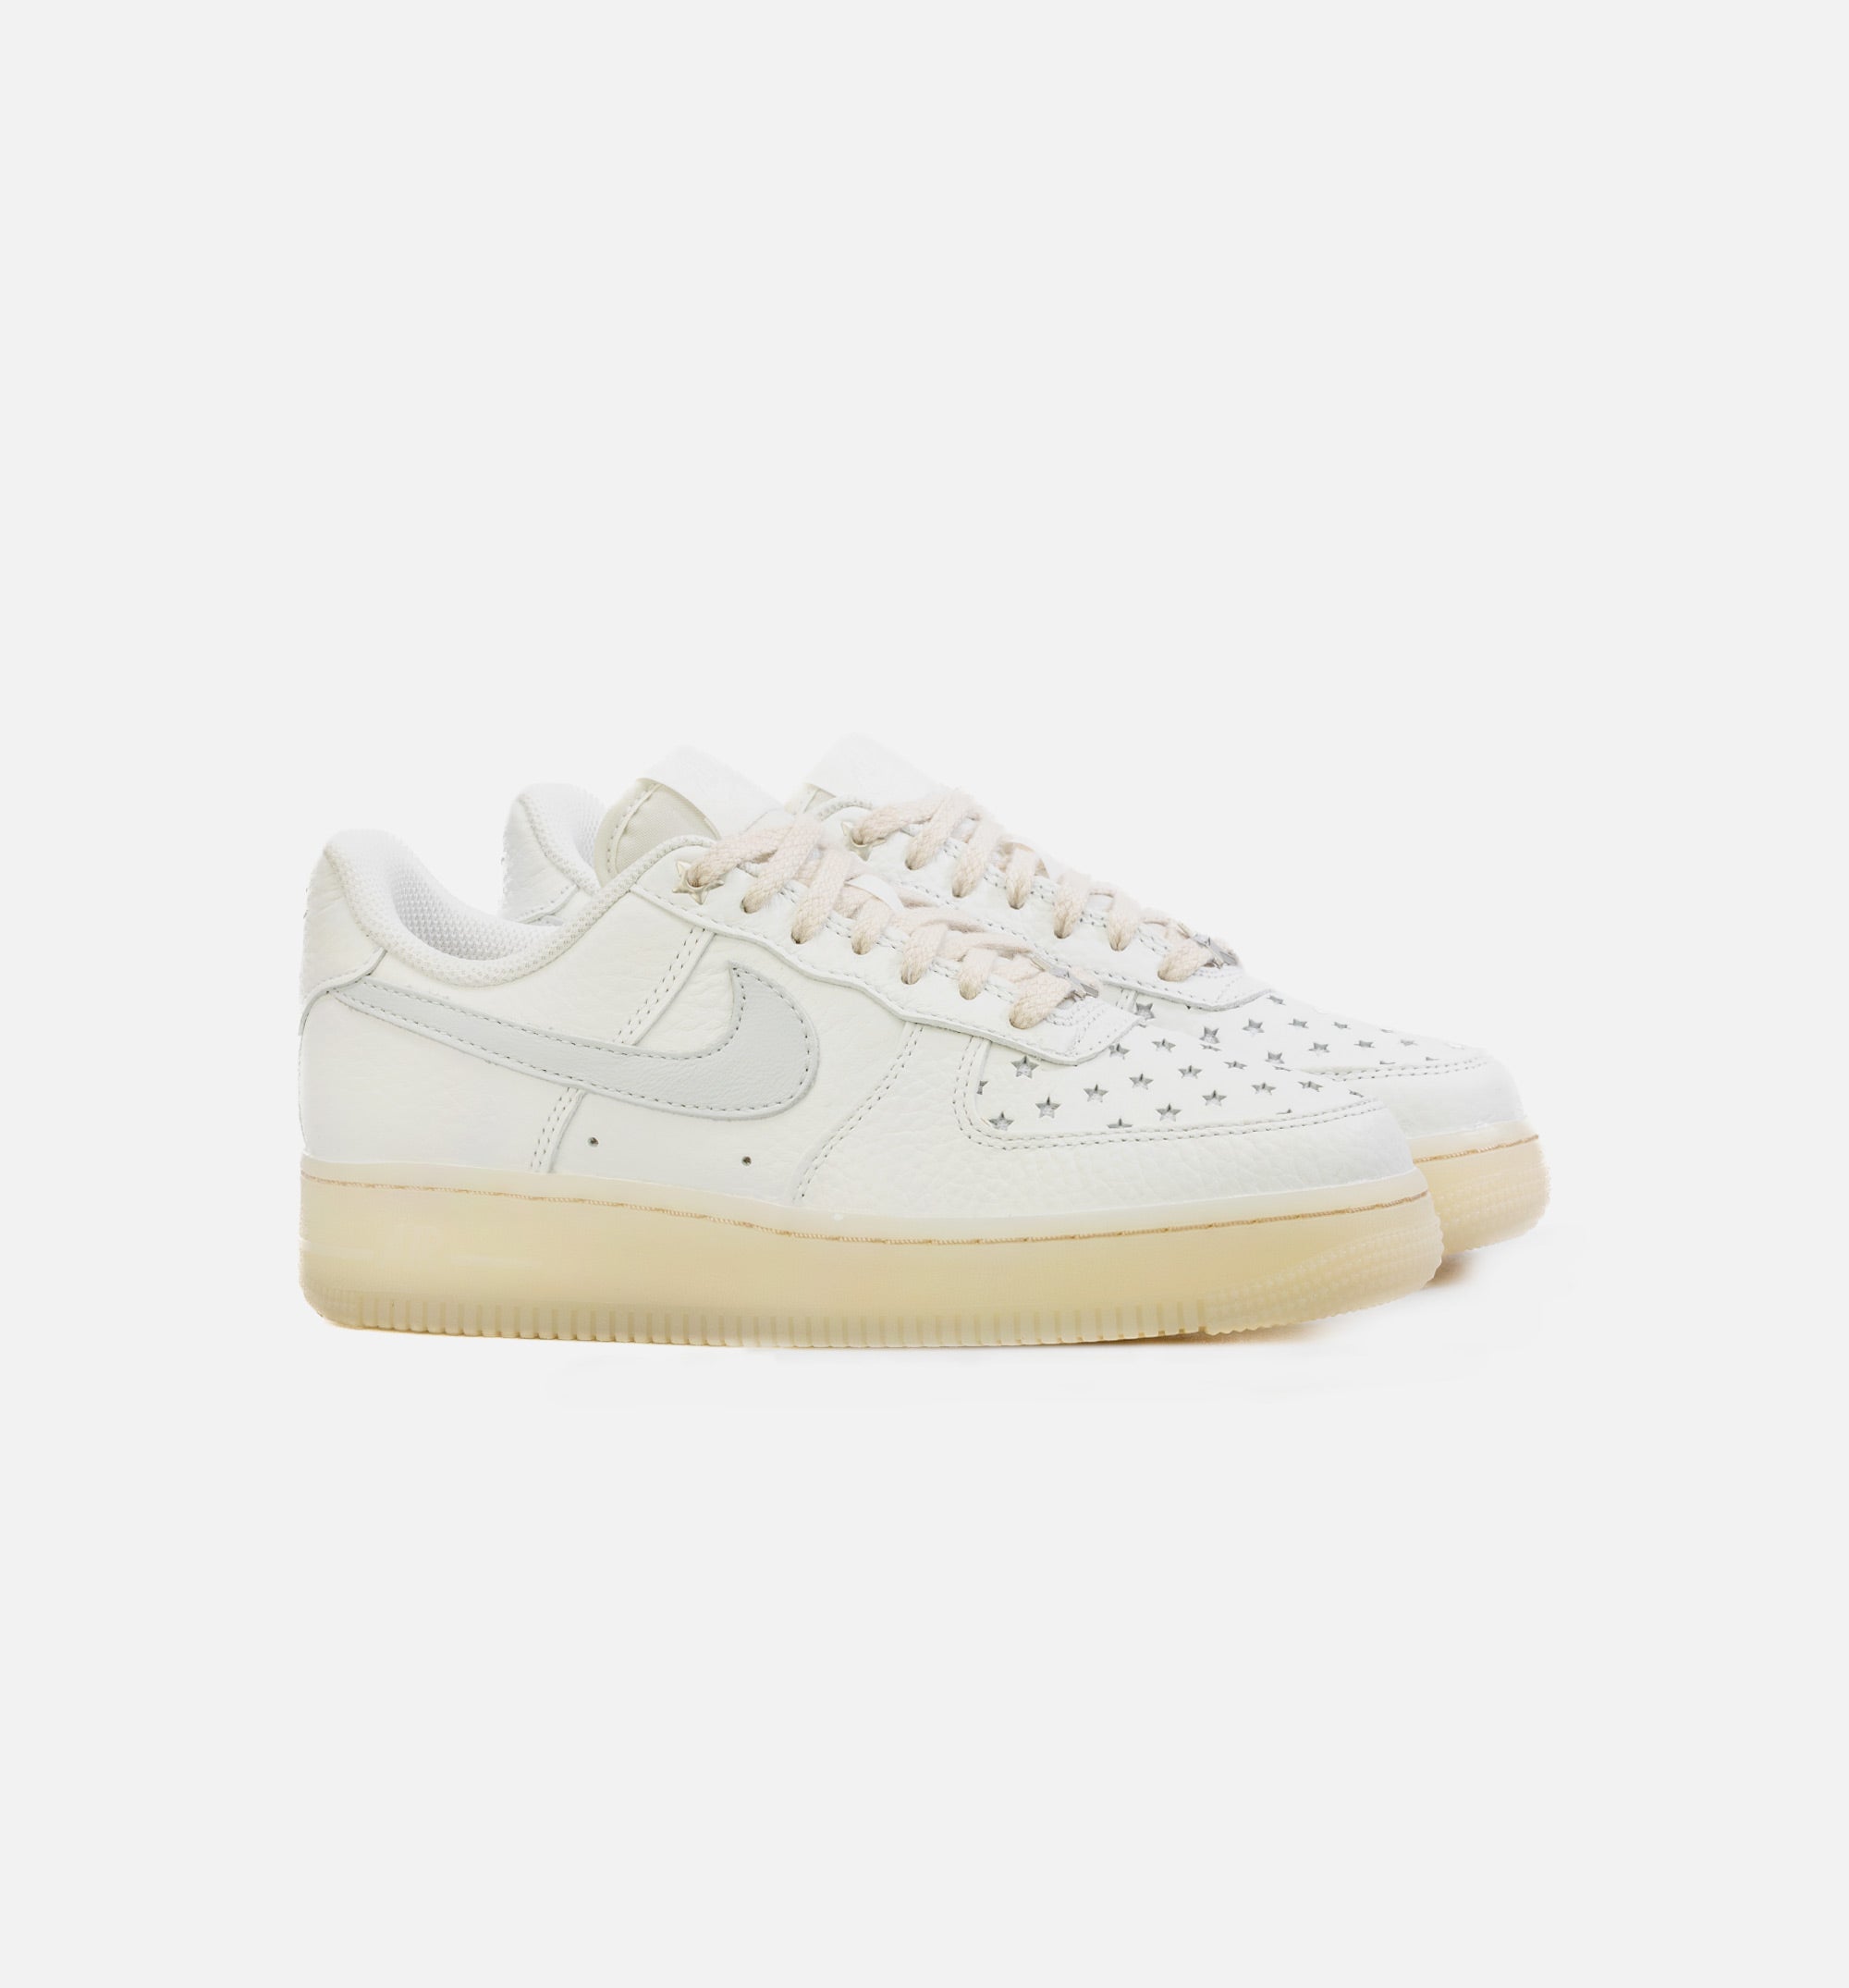 Buy the Nike Air Force 1 Low '07 LV8 Summit White Men Shoes Size 8